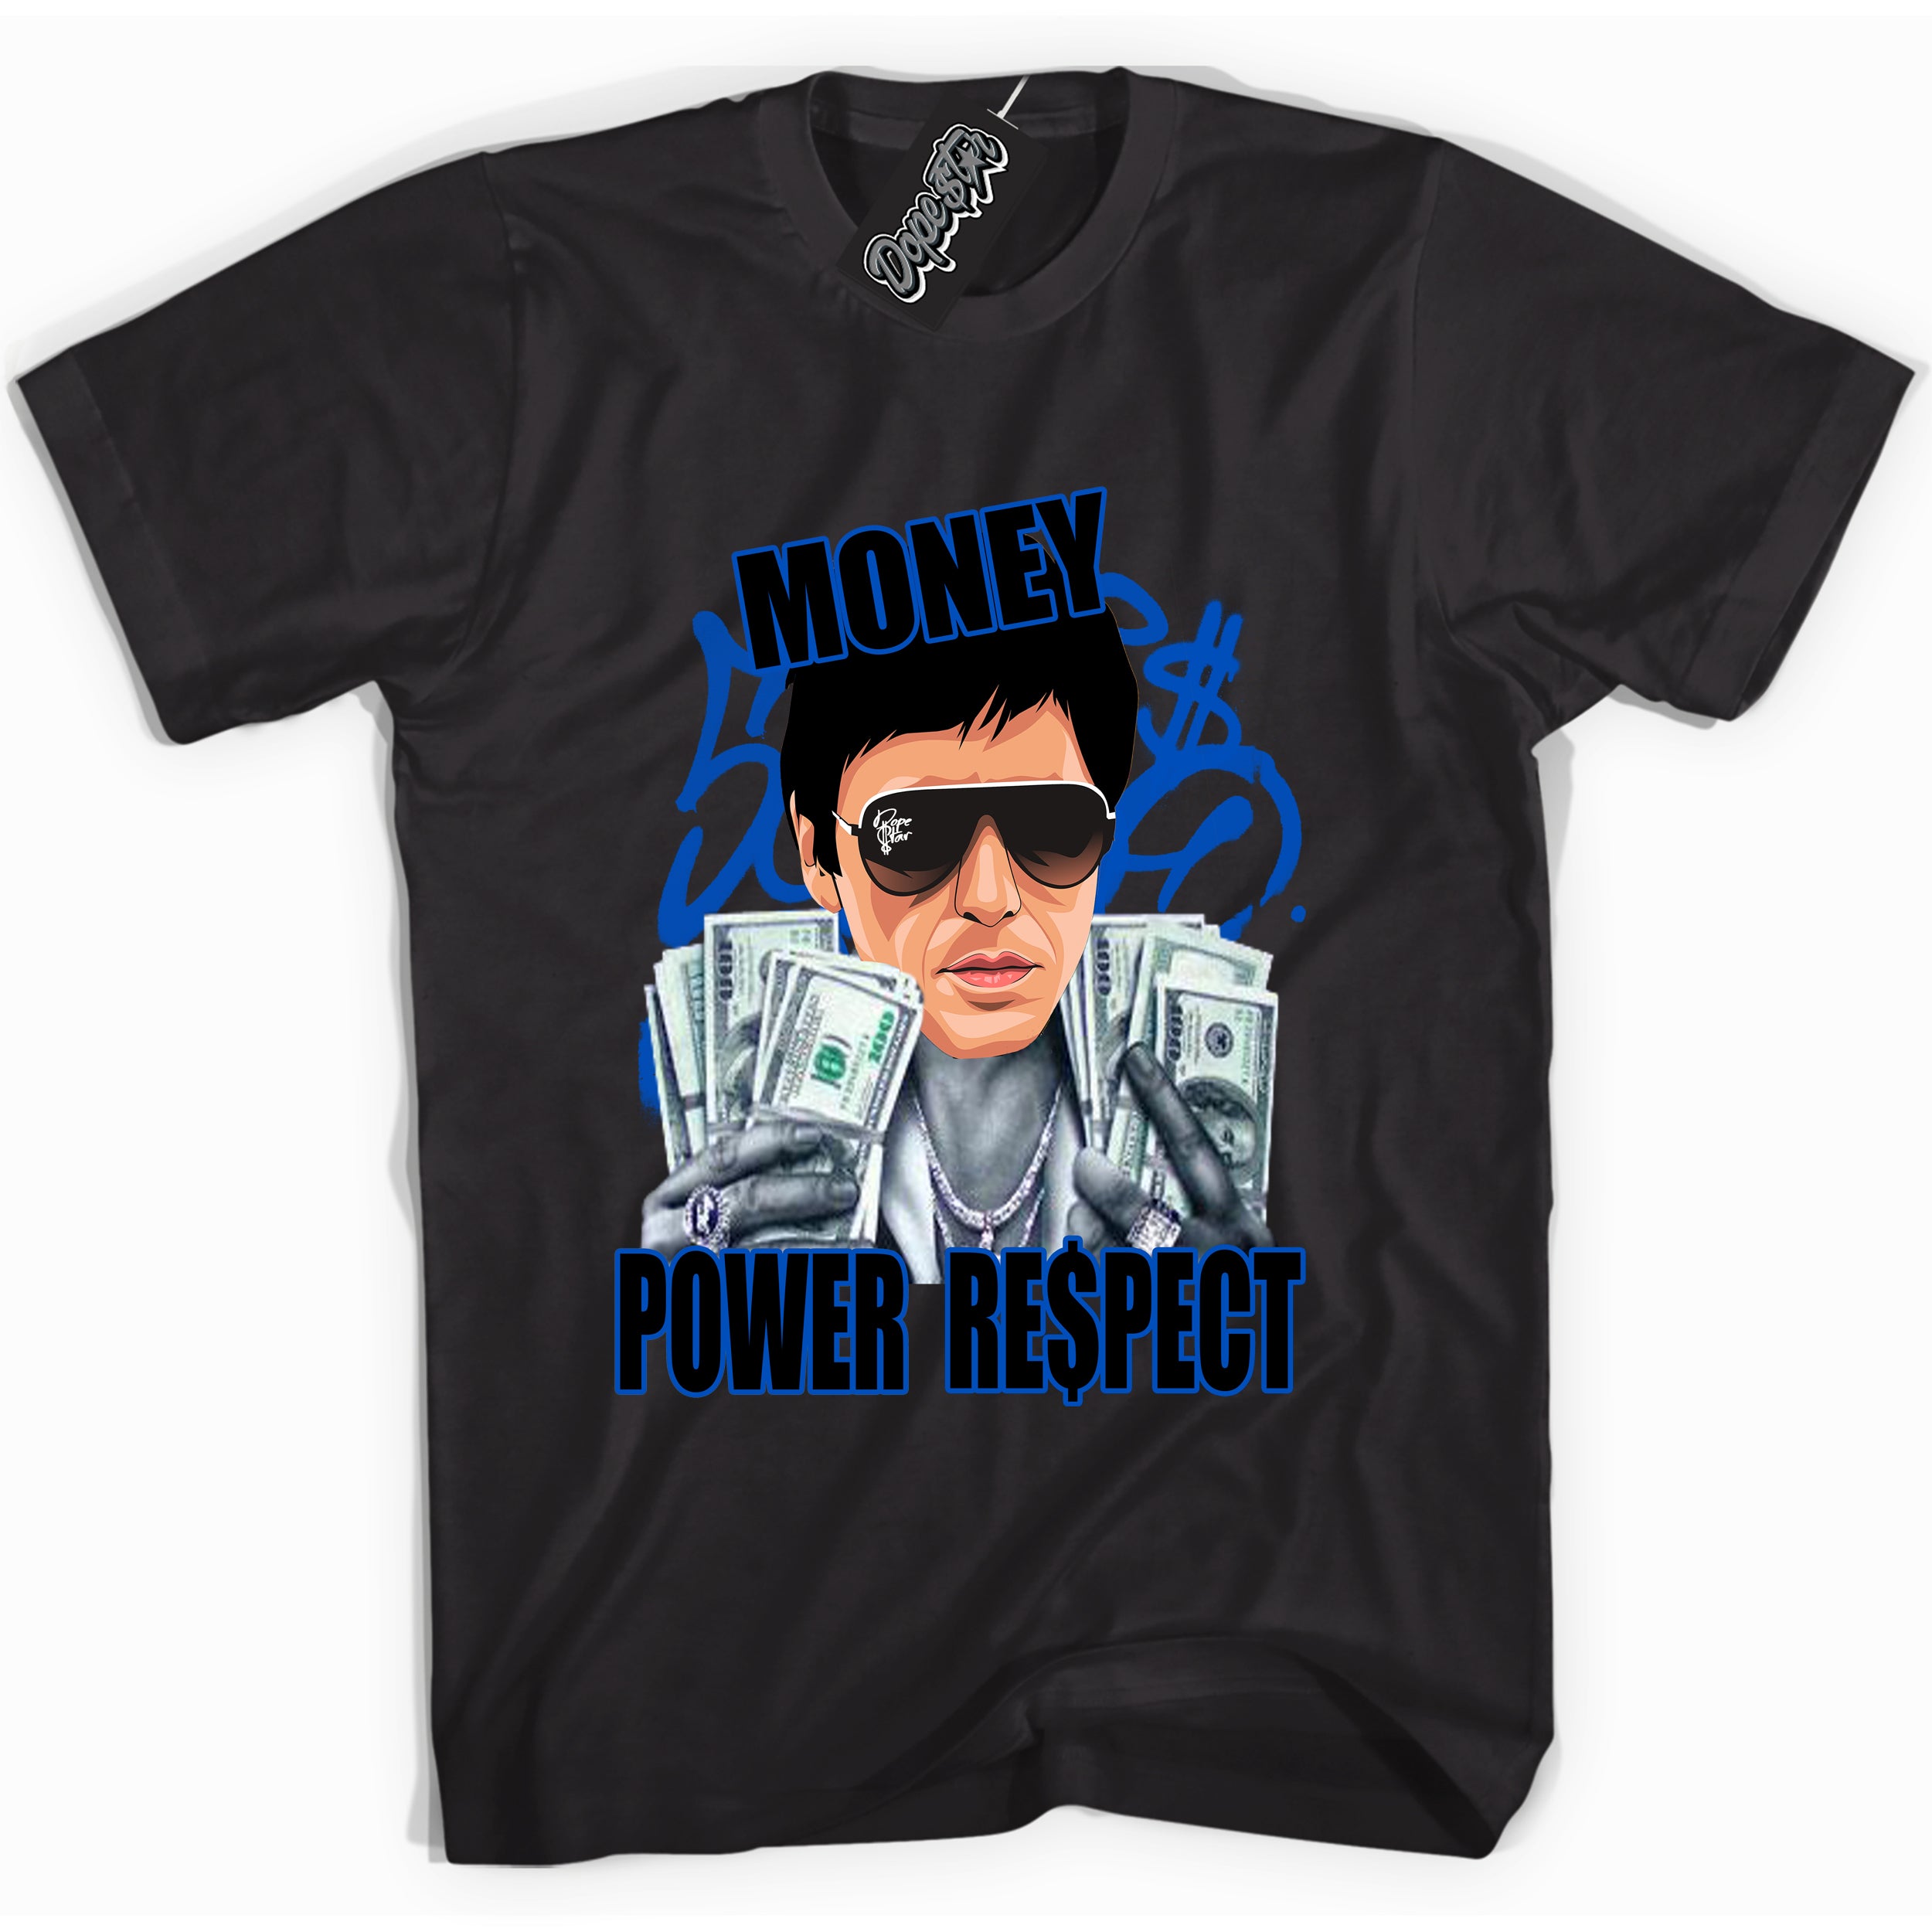 Cool Black graphic tee with Tony Montana print, that perfectly matches OG Royal Reimagined 1s sneakers 